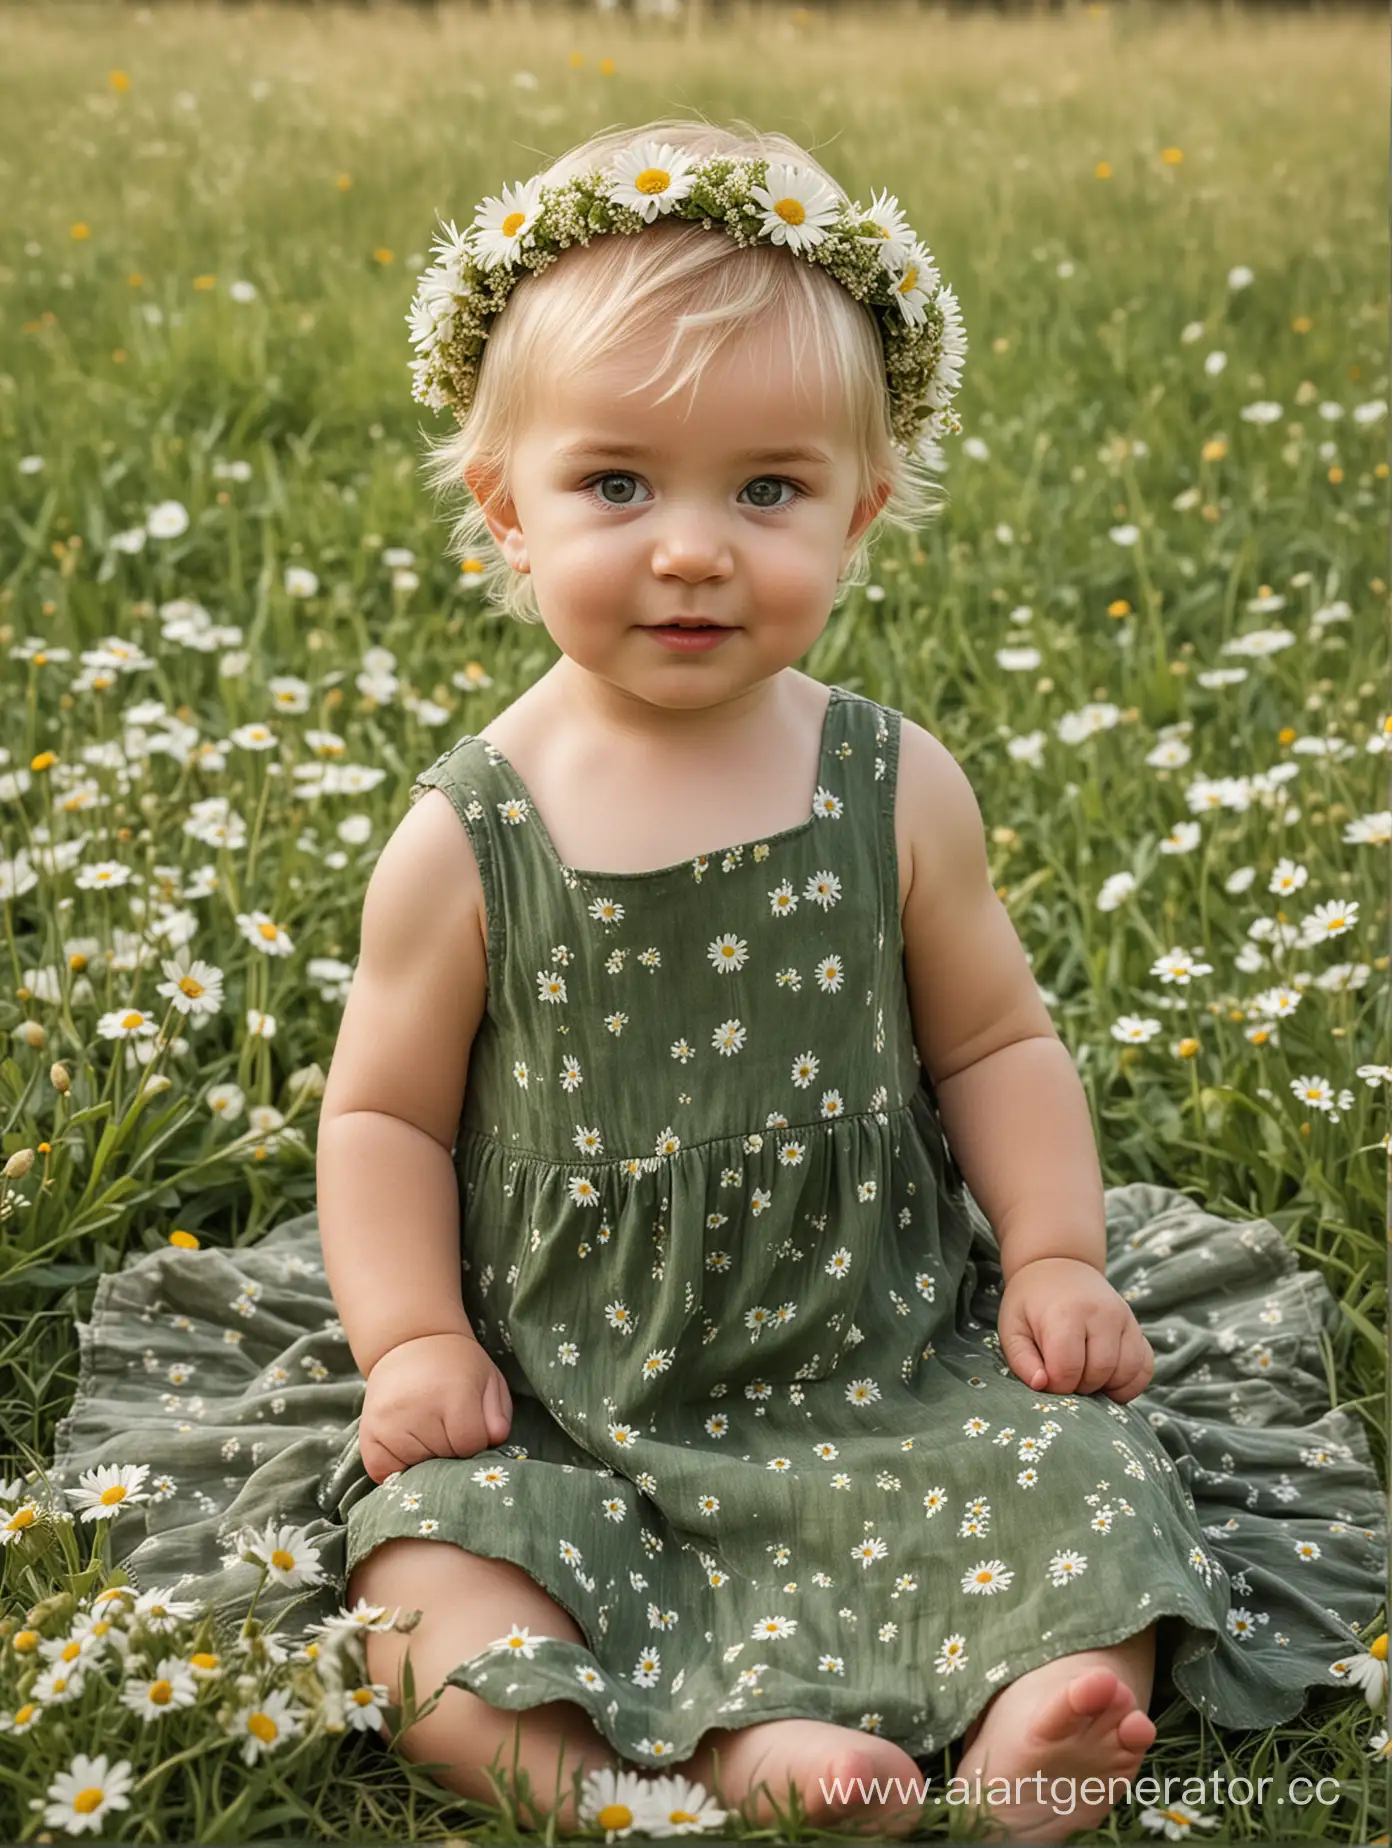 Adorable-Baby-Girl-in-Lush-Green-Dress-Surrounded-by-Daisies